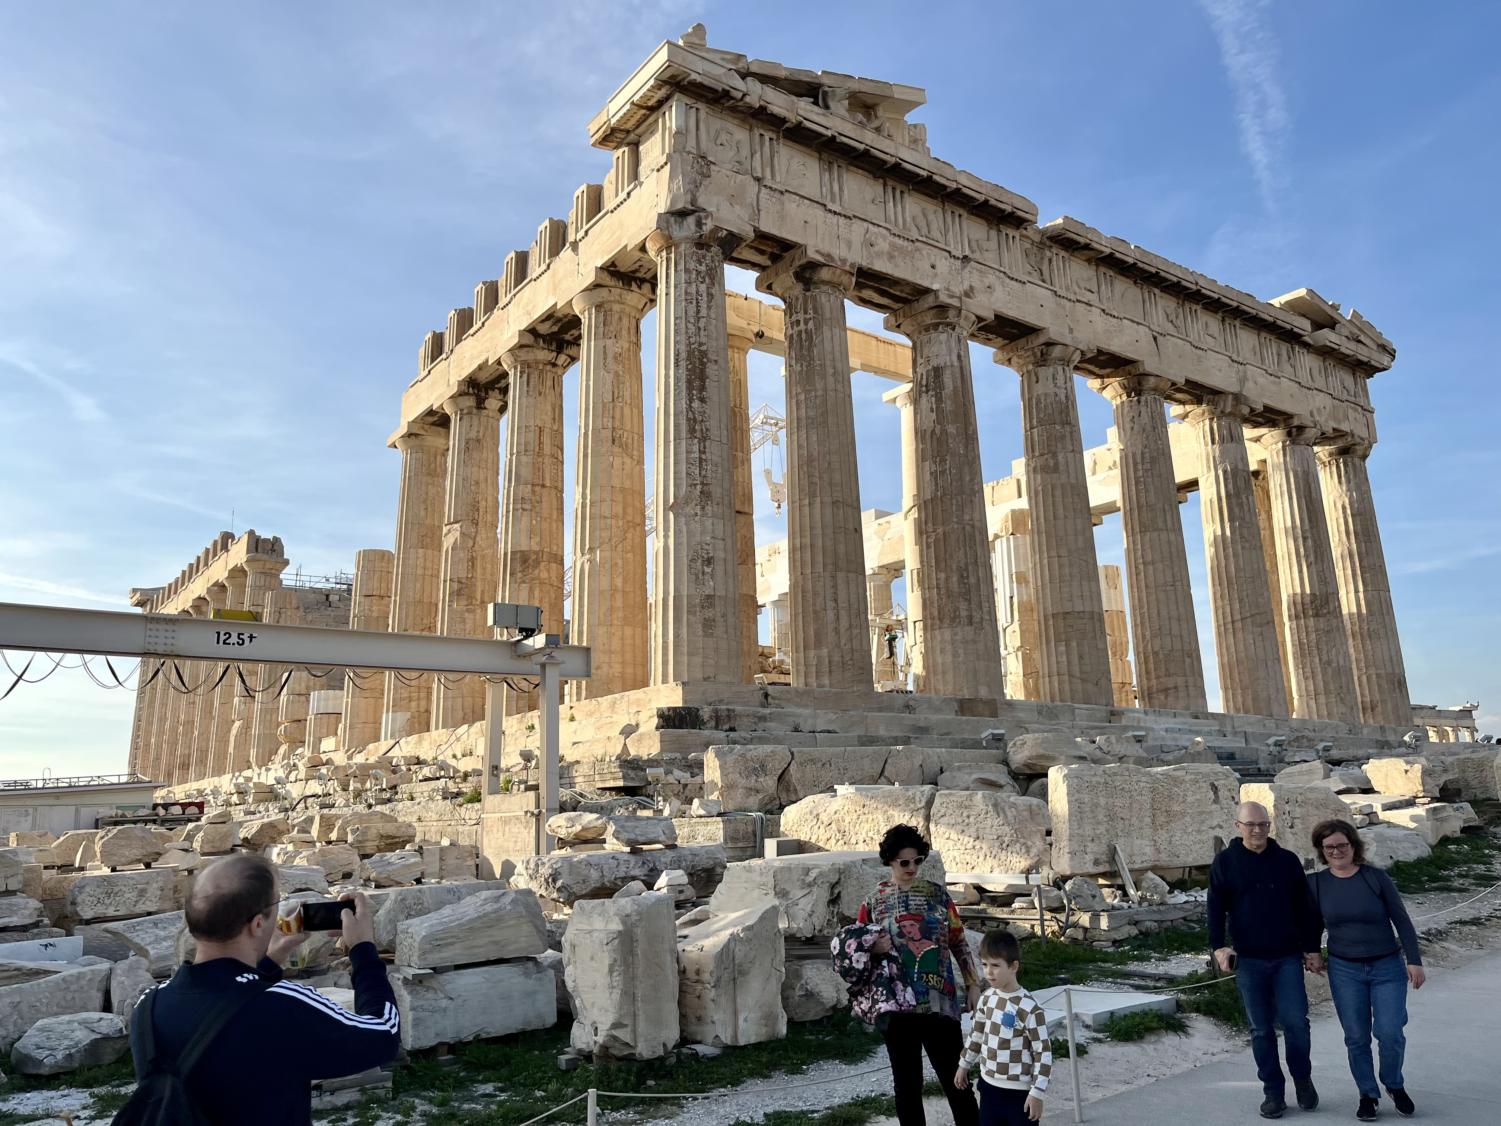 The centuries-old Parthenon is one piece of architecture still standing in Greece.